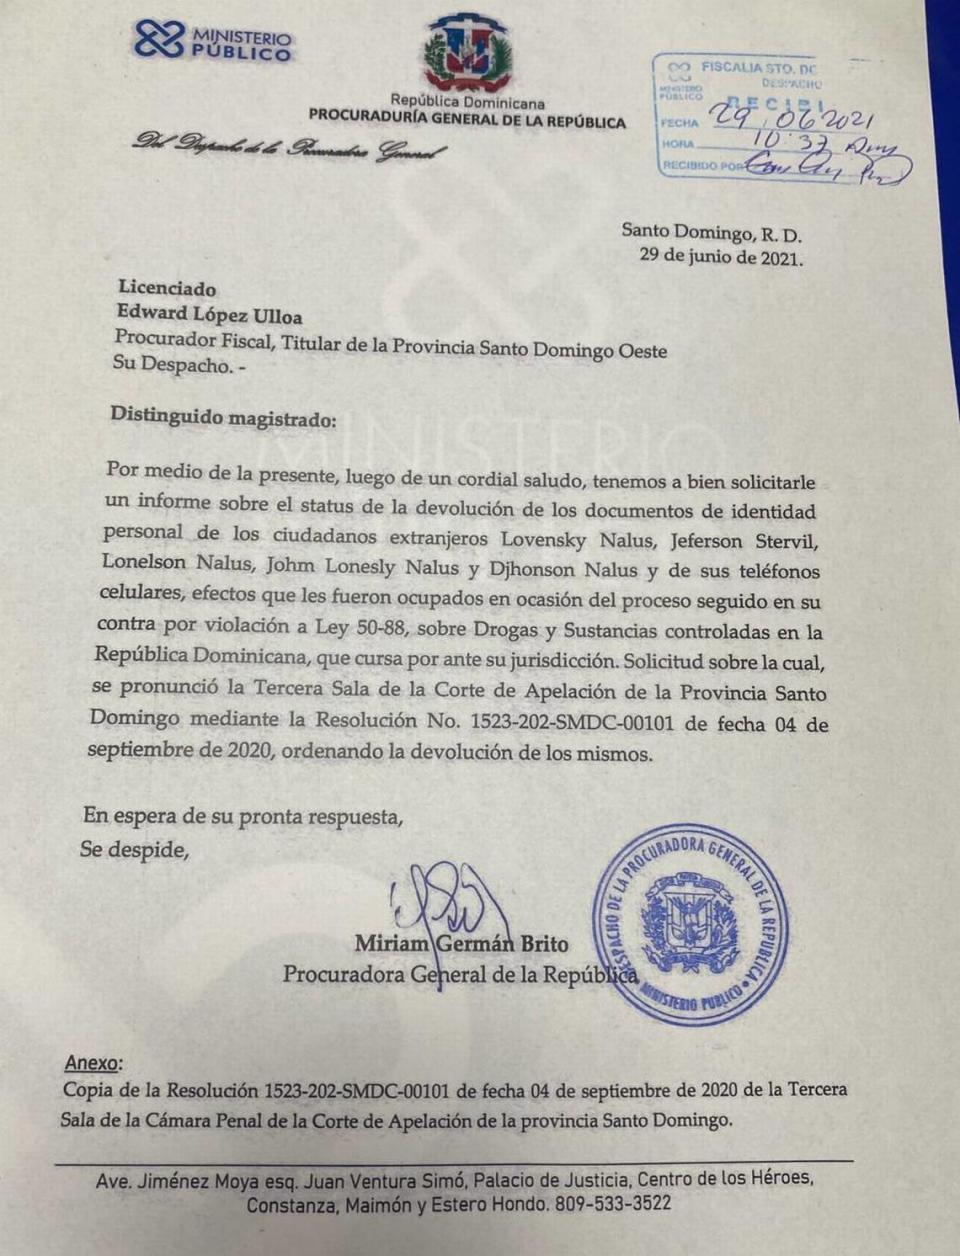 After an inquiry by the Miami Herald and McClatchy Washington Bureau about the Nalus brothers’ arrest, the attorney general for the Dominican Republic finally asked about the case. This is the response of the prosecutor’s office.